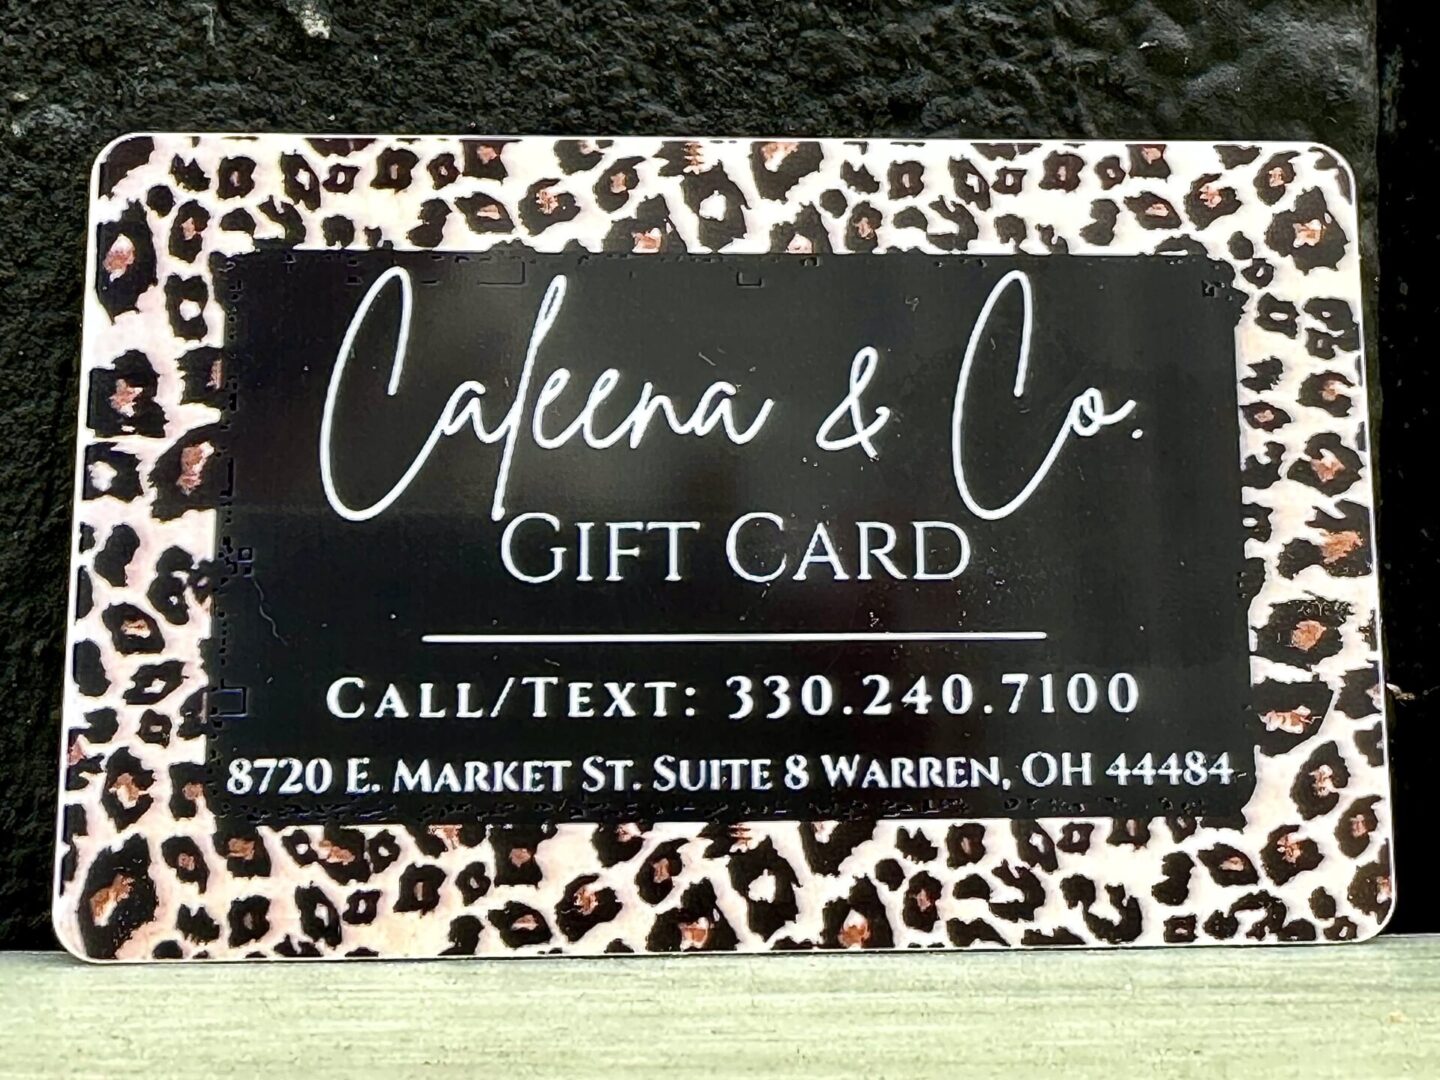 A $100 Caleena Gift Card *IN STORE use only* with a leopard print on it.